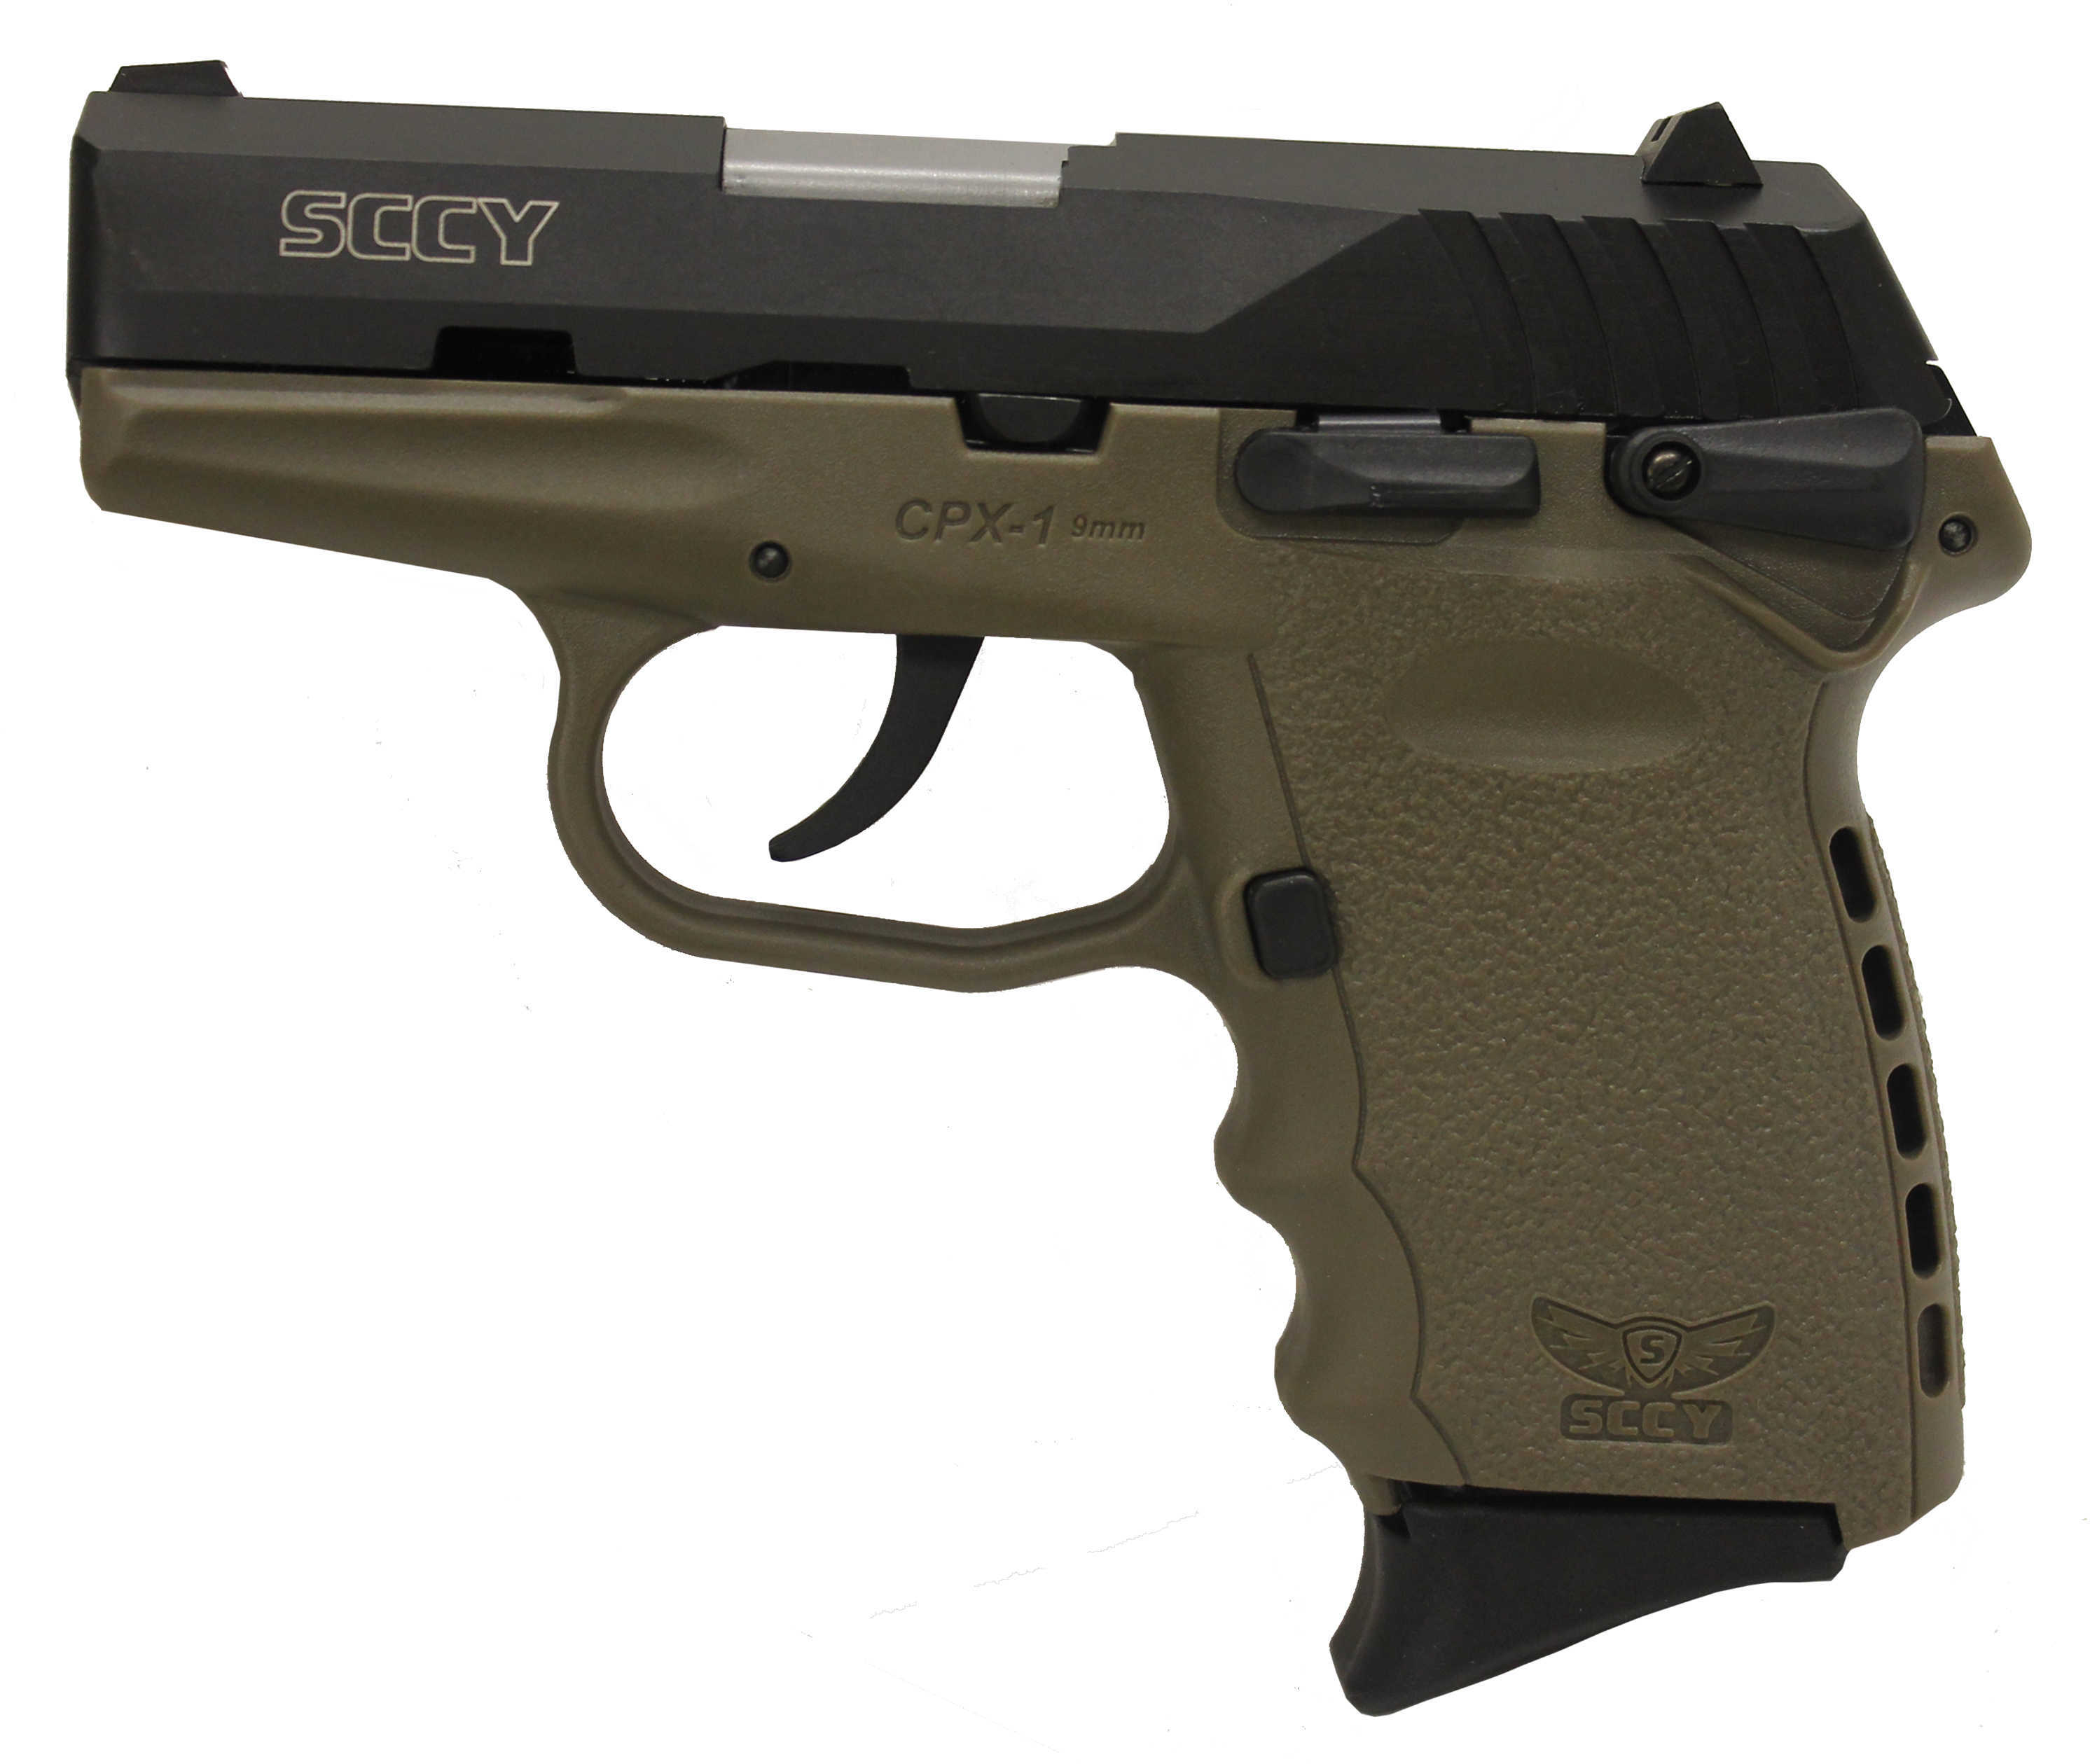 SCCY CPX-1 Pistol 9mm Luger 3.1" Barrel 10 Round Integral Grip Flat Dark Earth CPX1CBDE